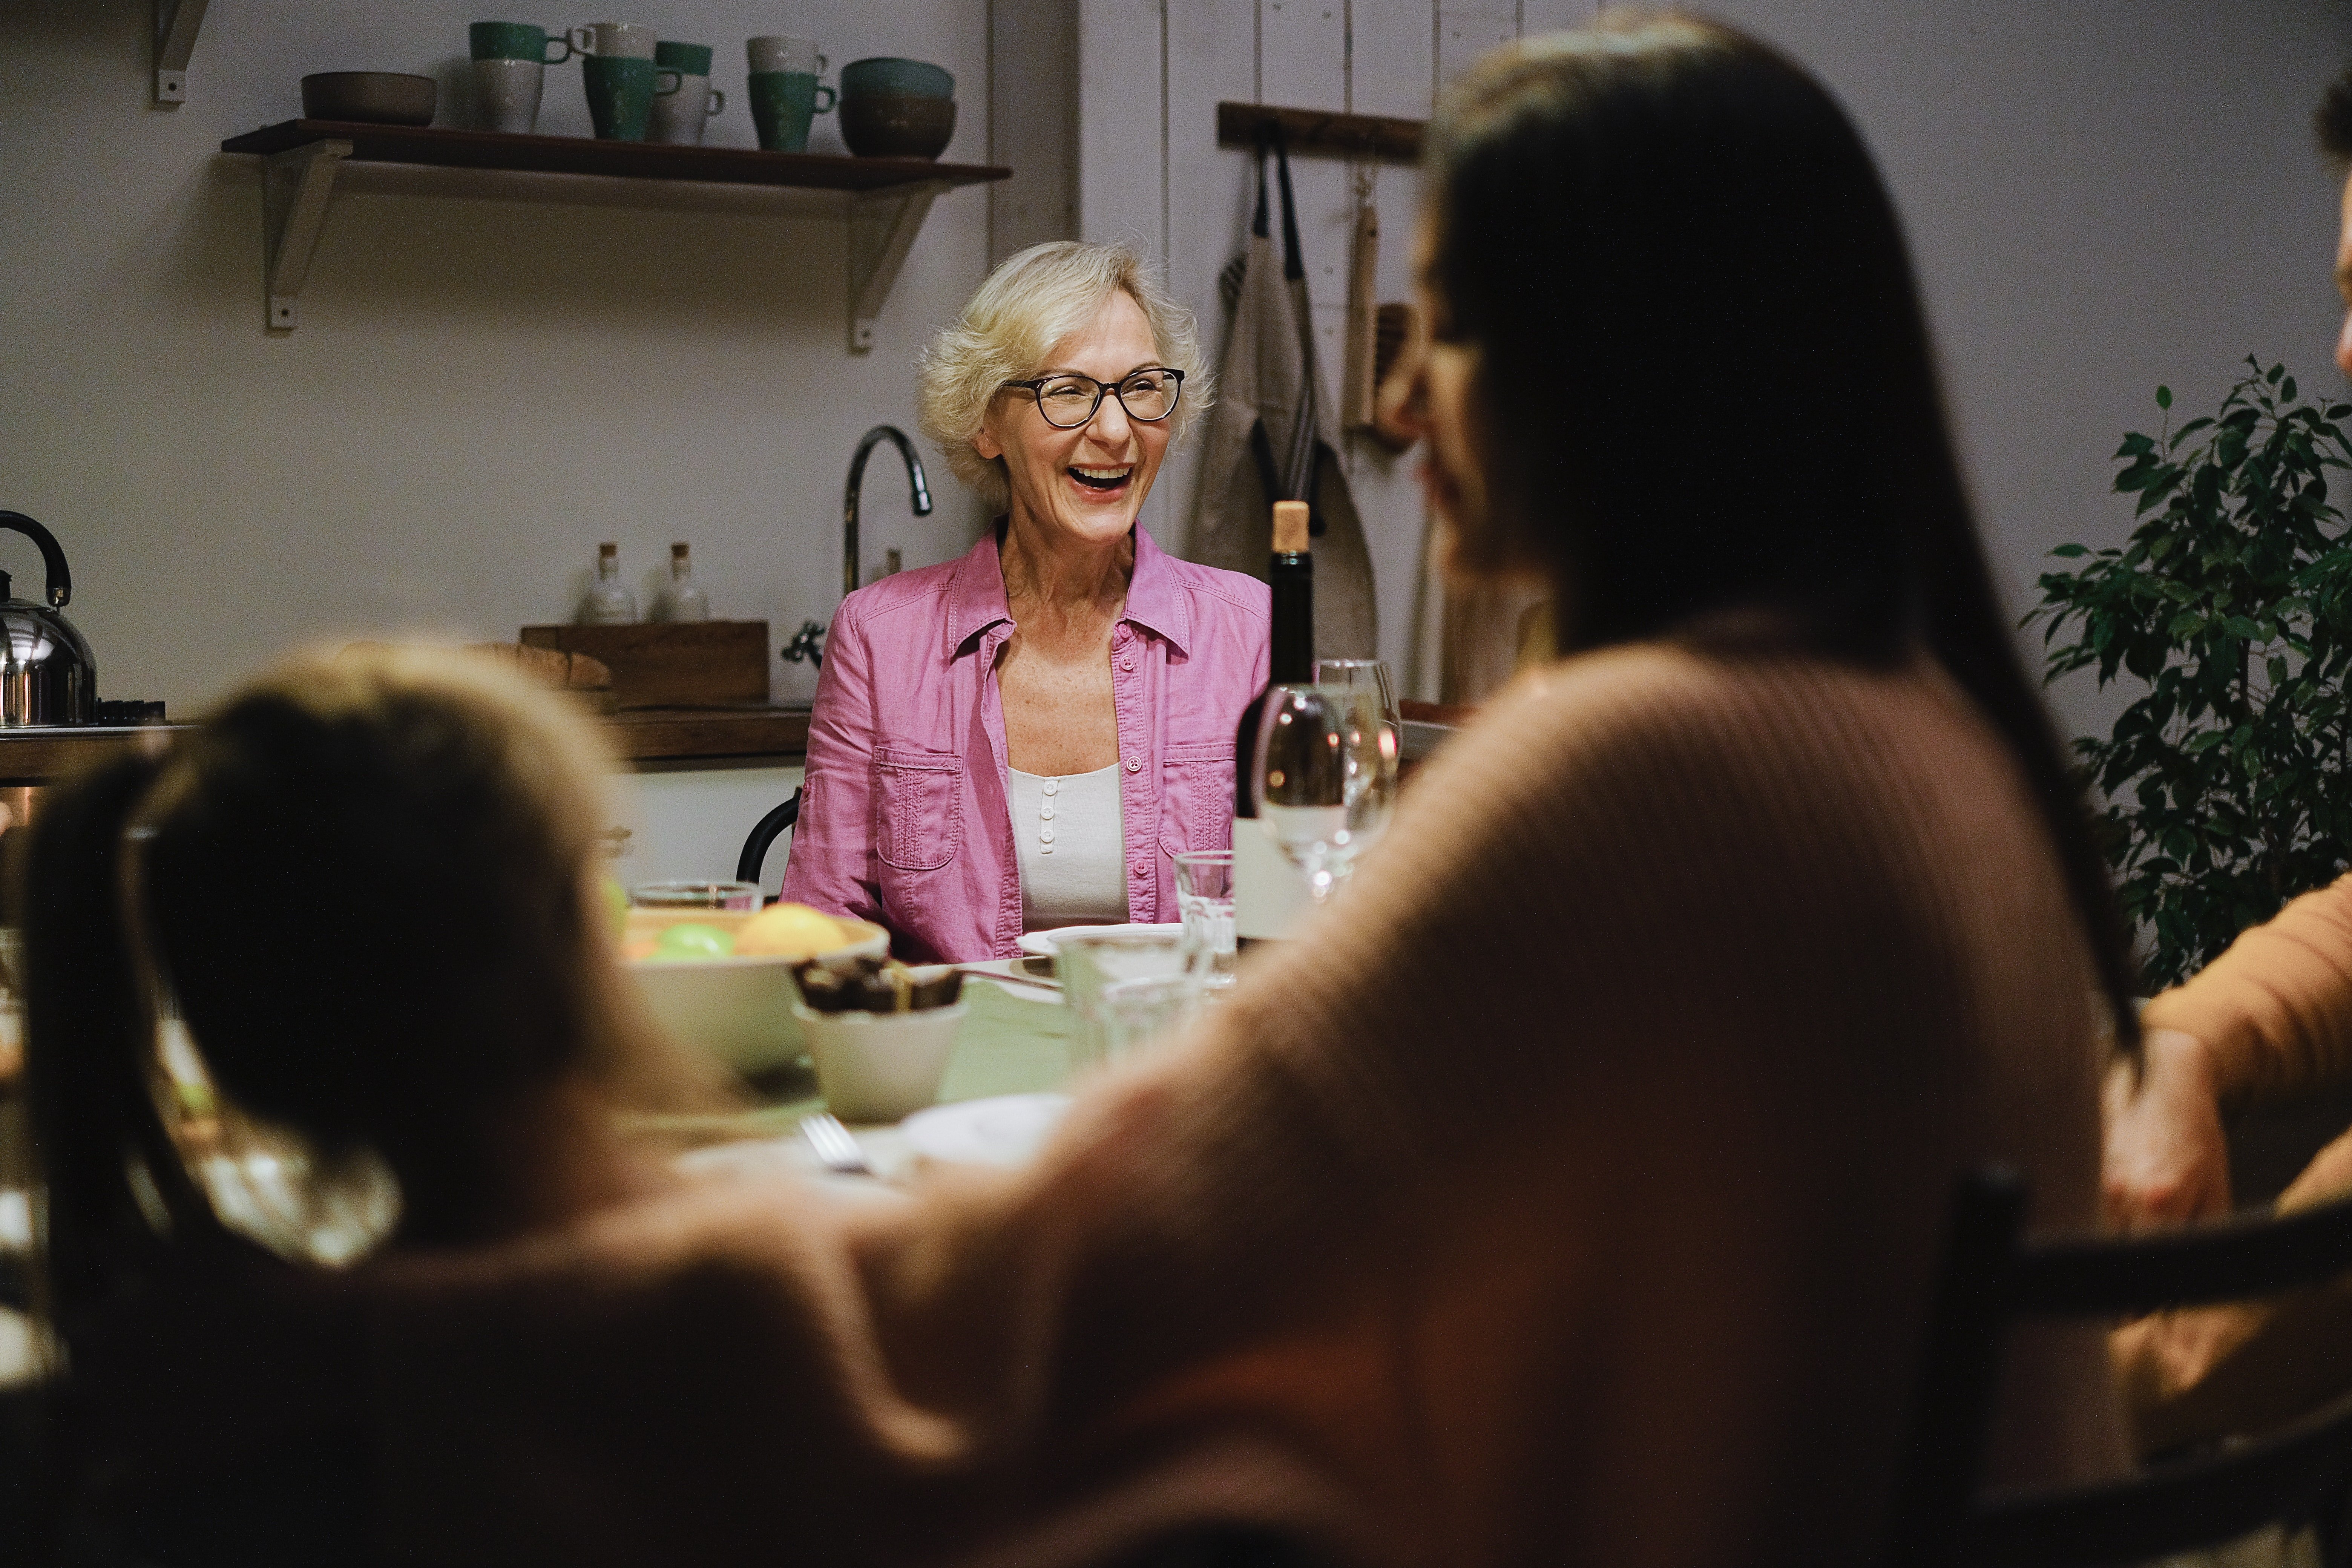 Margaret was delighted to feed Cynthia's family. | Source: Pexels